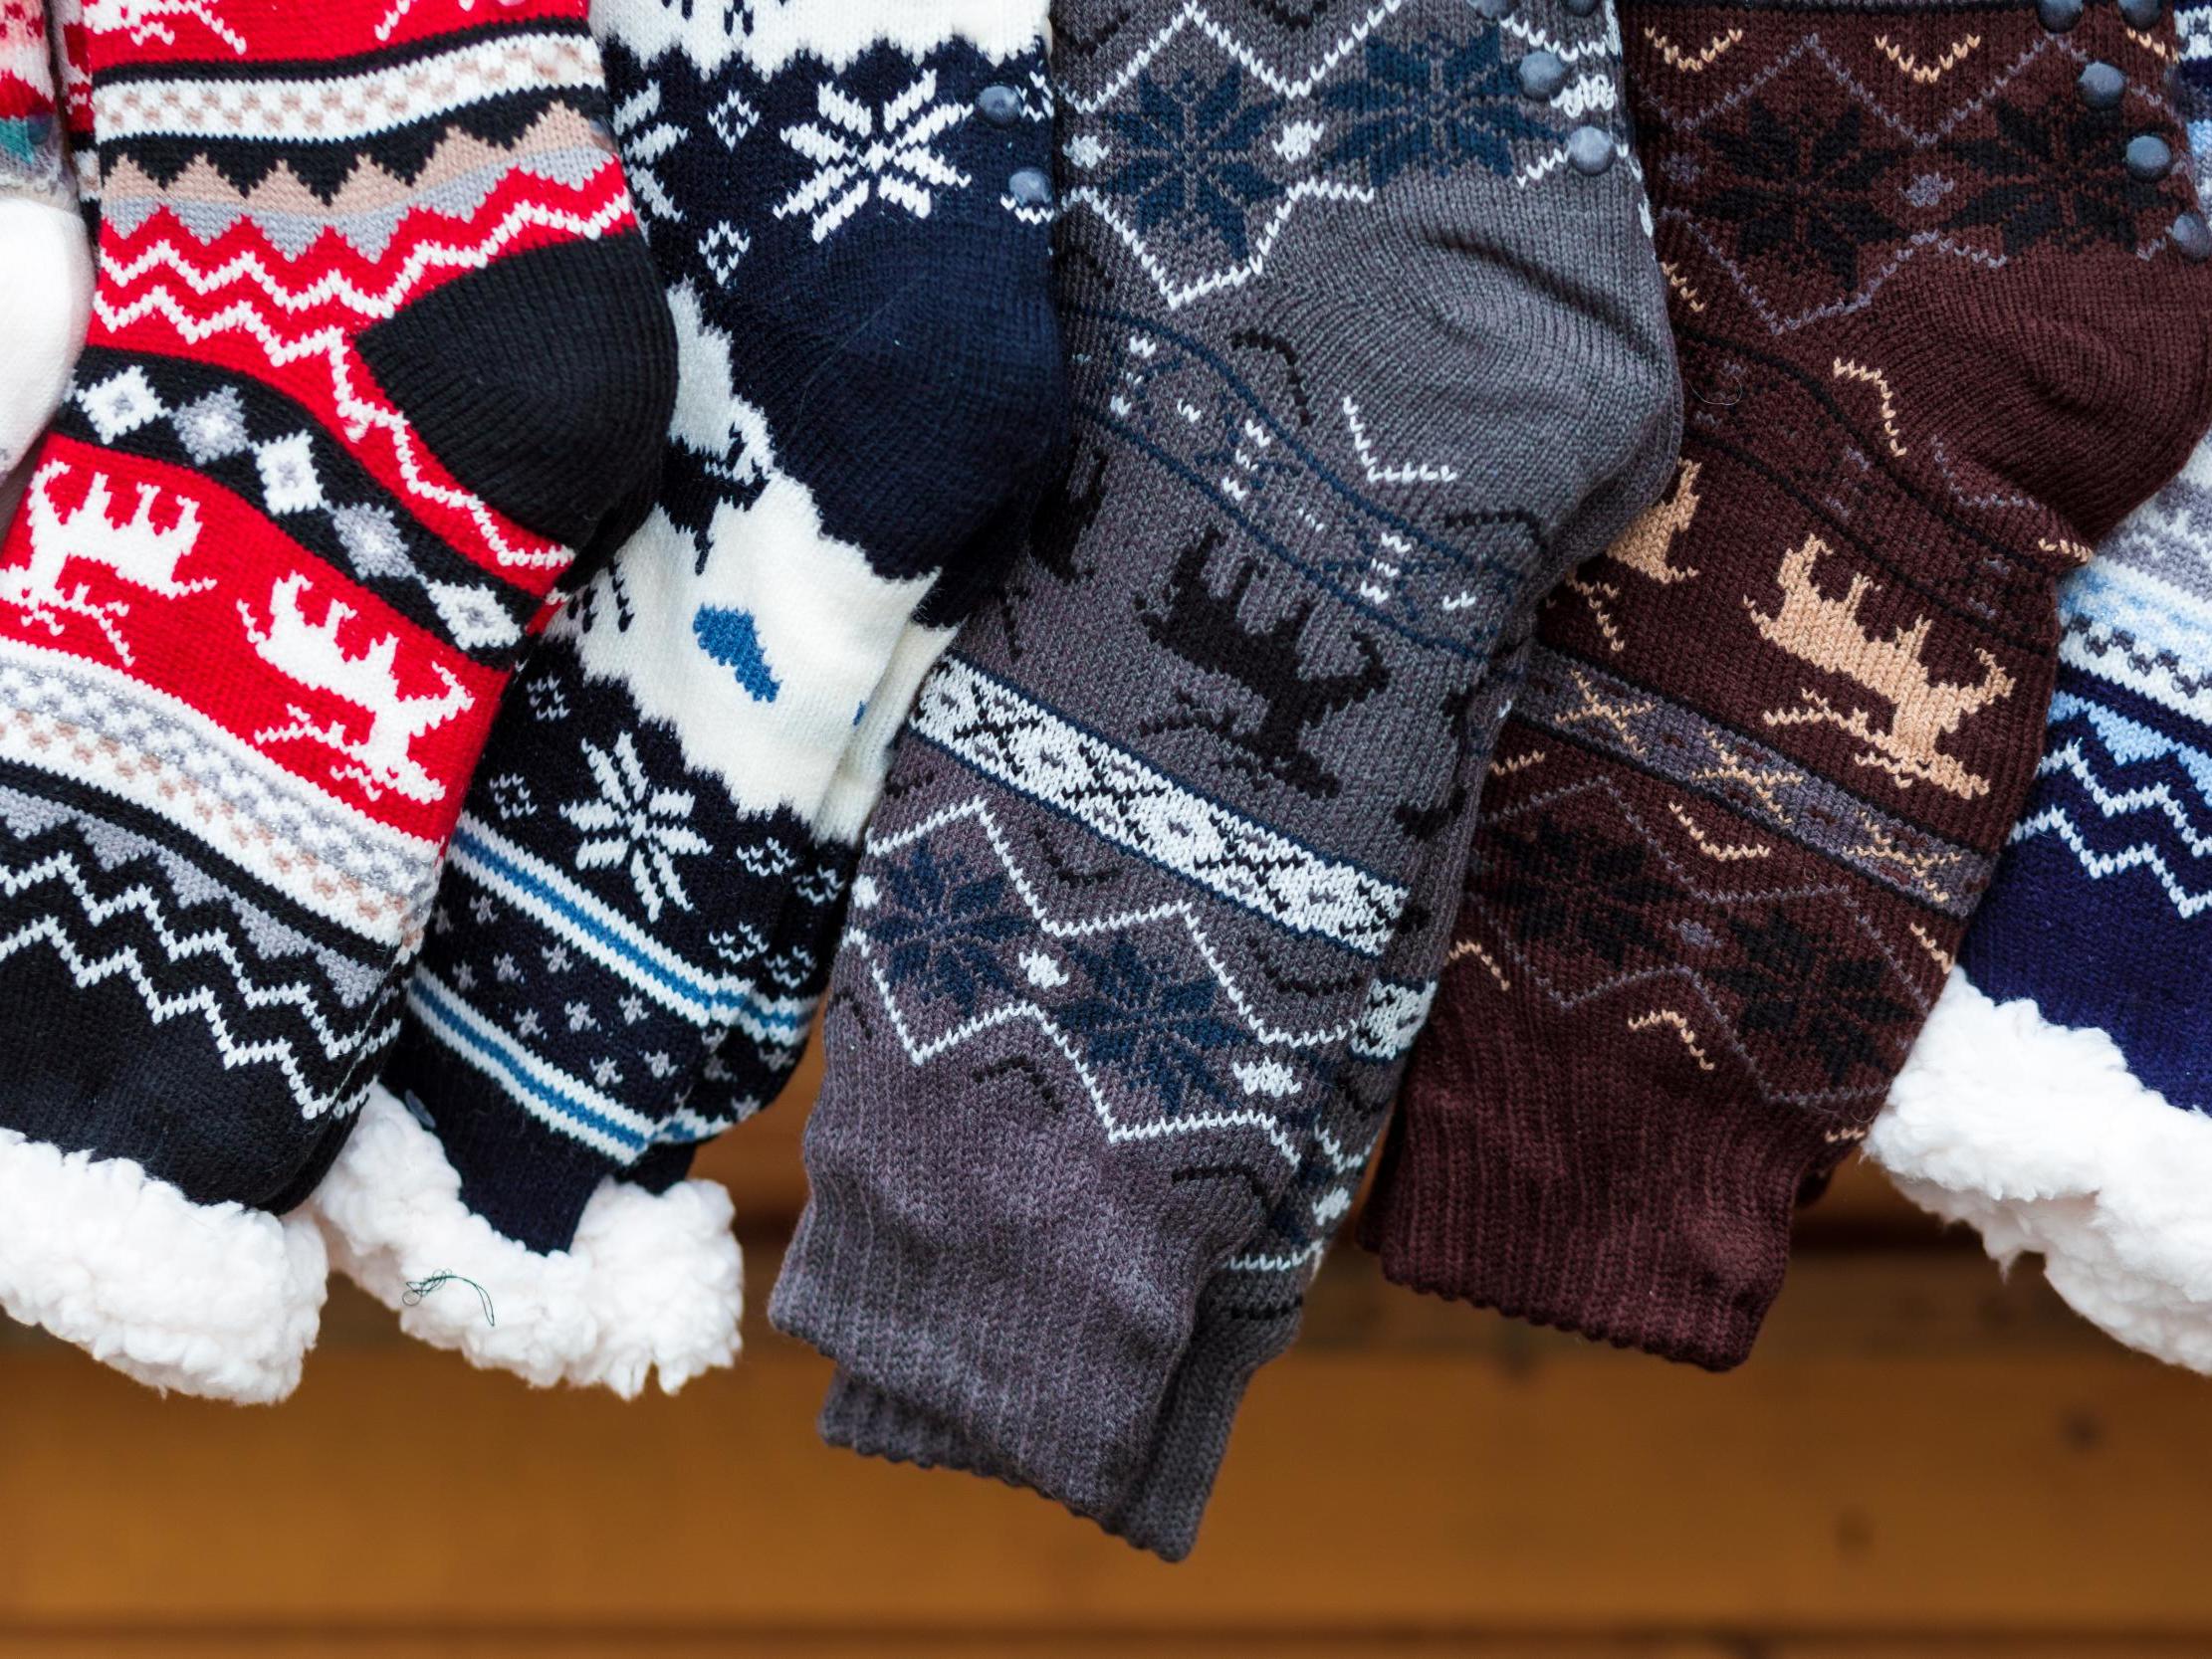 Christmas socks: one customer had a grisly surprise after Christmas